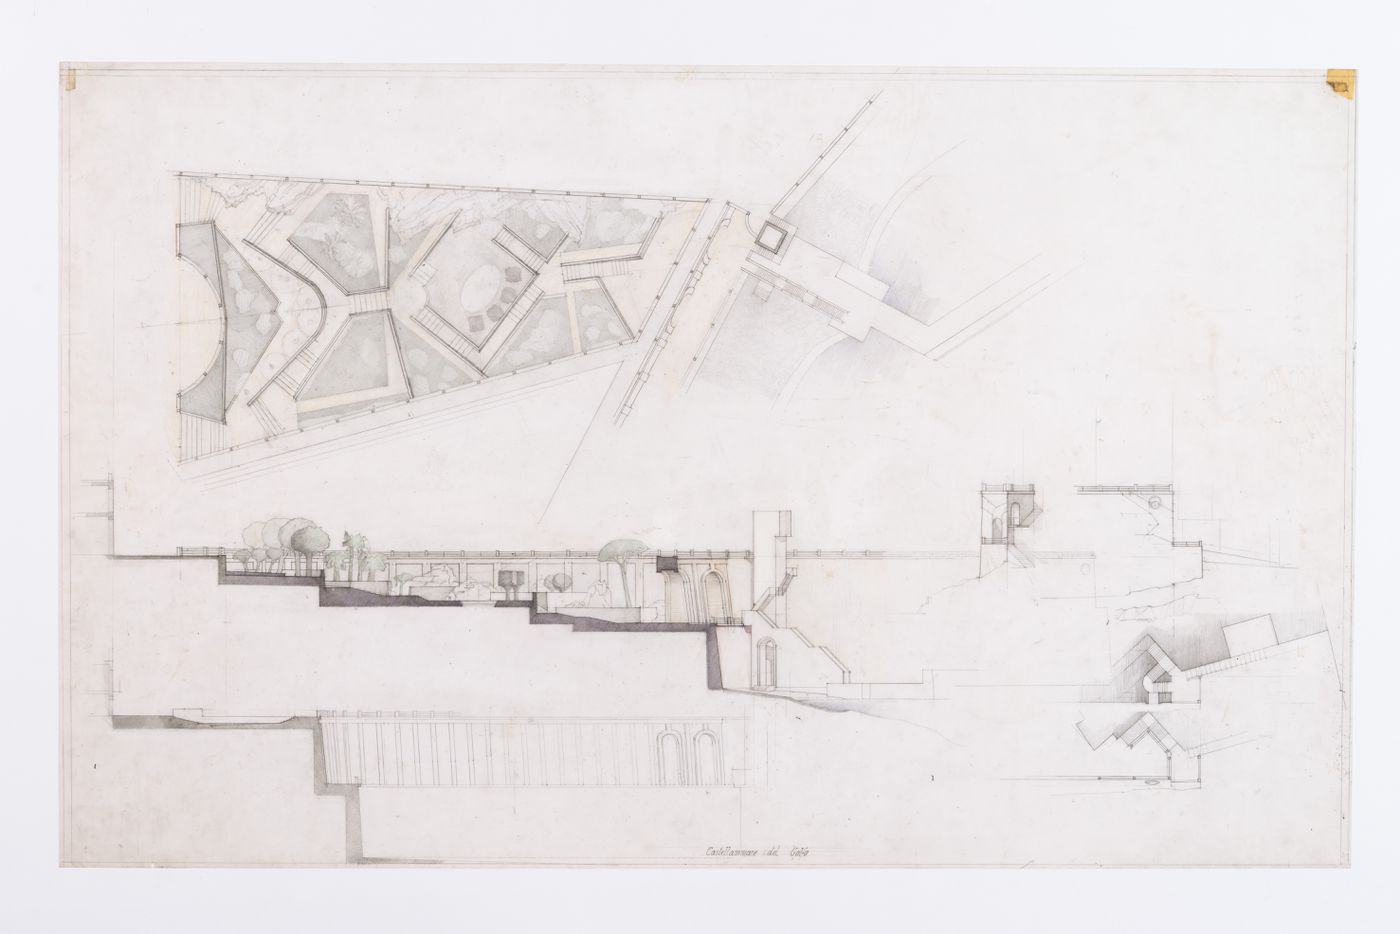 Plans, section and elevation for Marina di Petrolo, Castellammare di Stabia, Italy